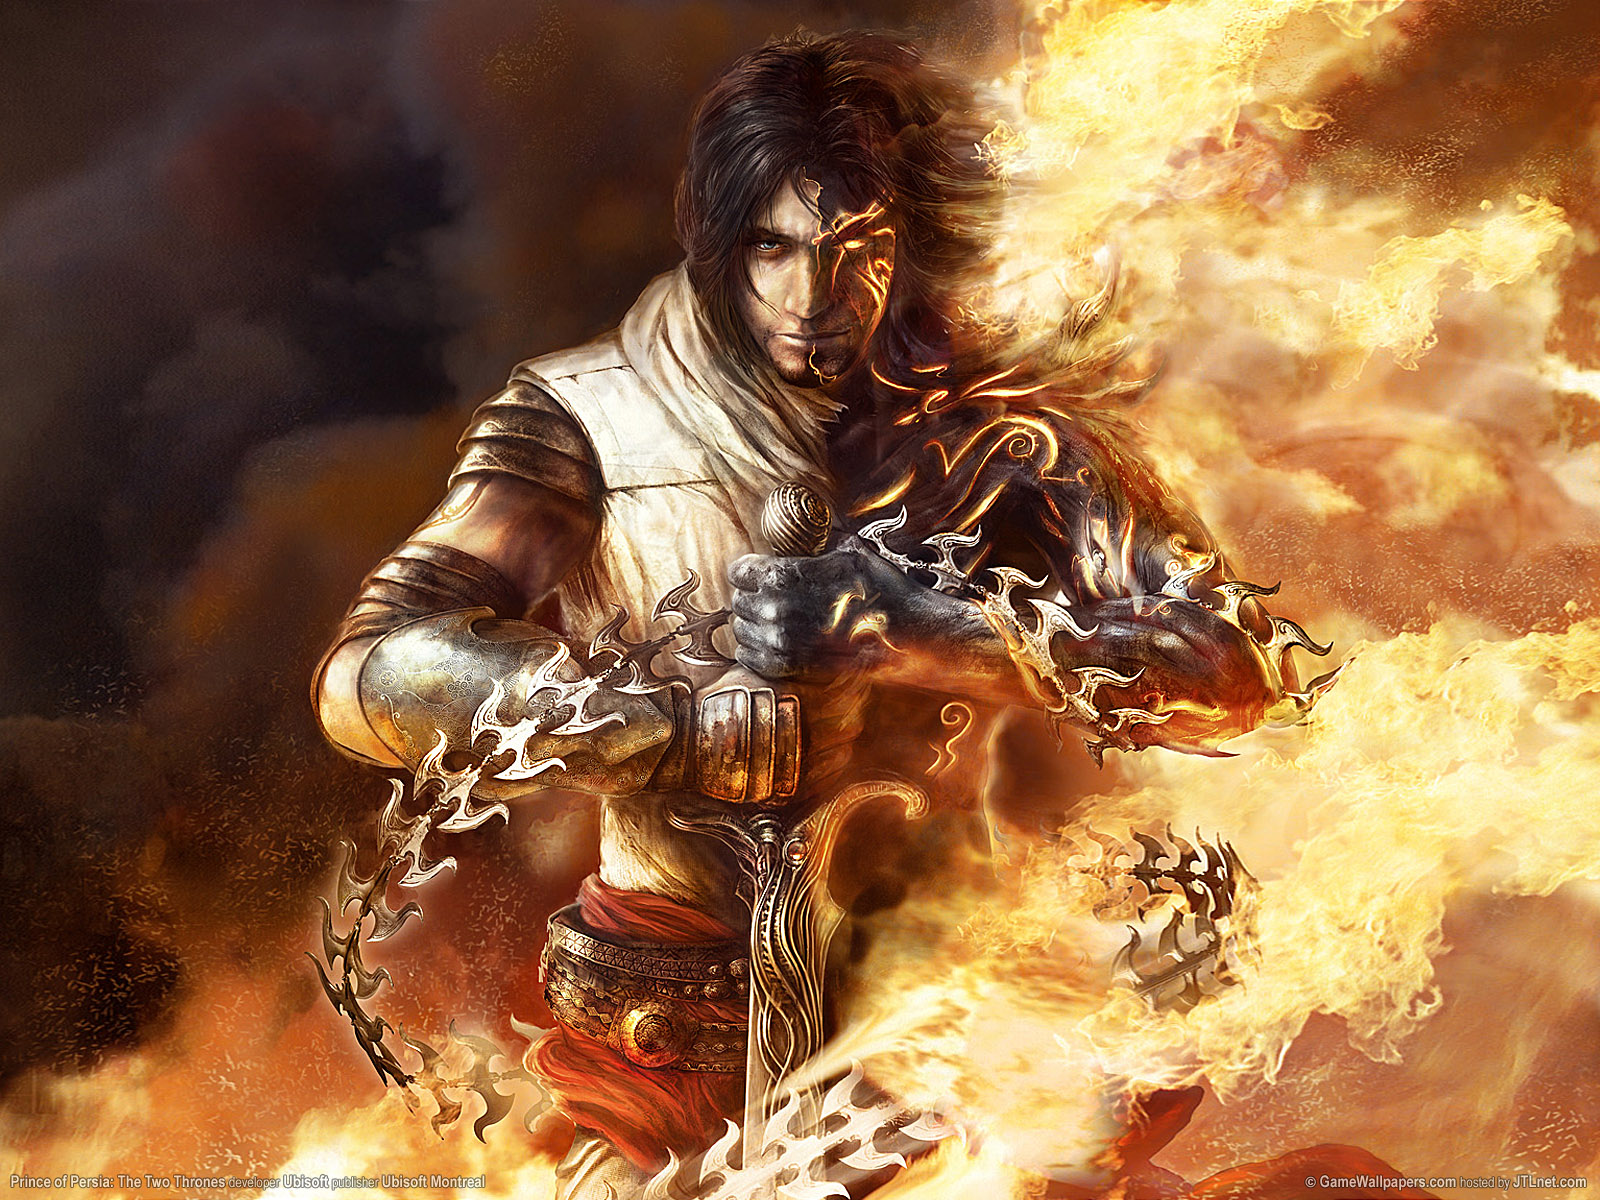 ۳۵۰۹۴۷۴-hd_prince_of_persia__two_thrones_wallpaper-normal